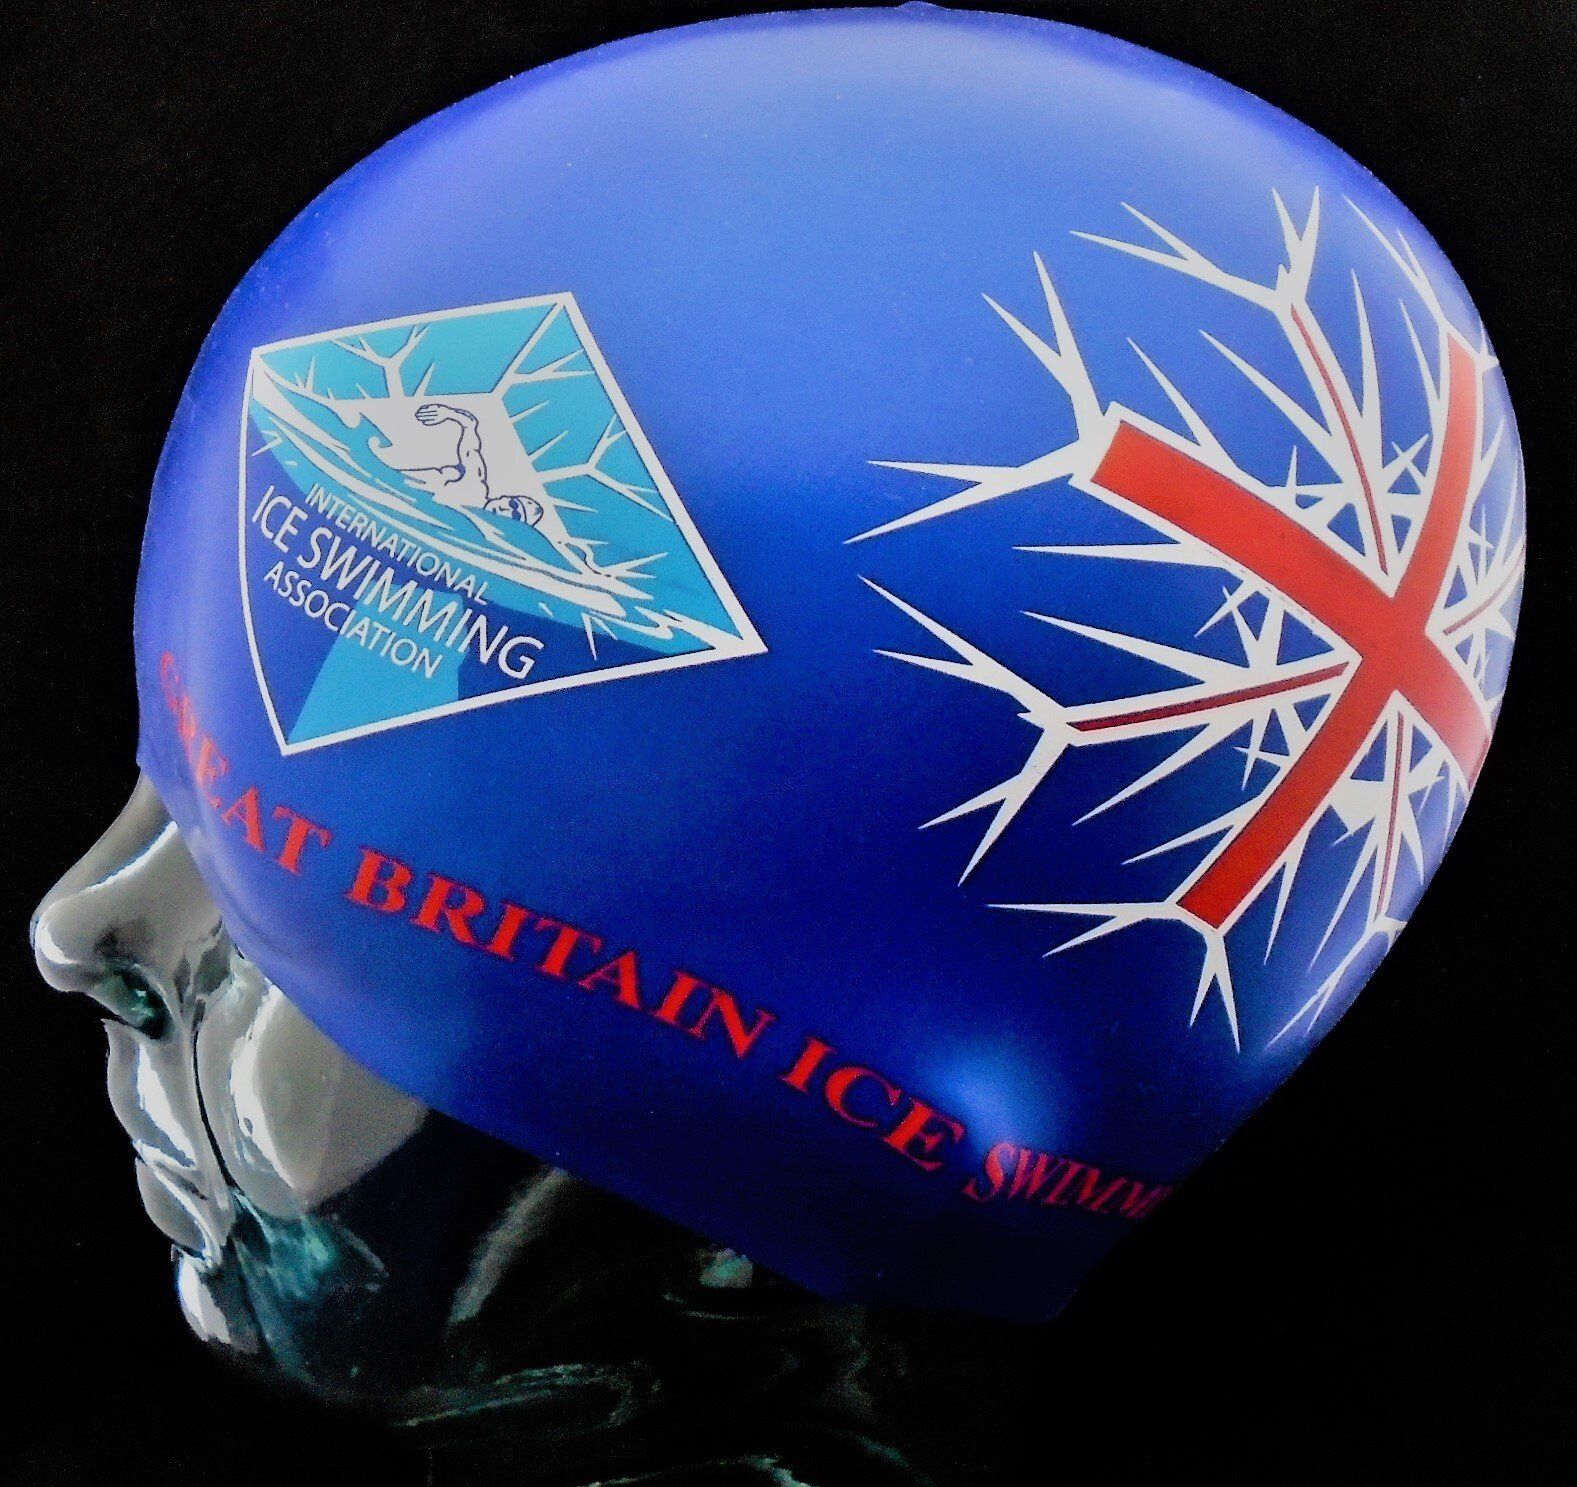 A blue helmet that says great britain ice swimming on it